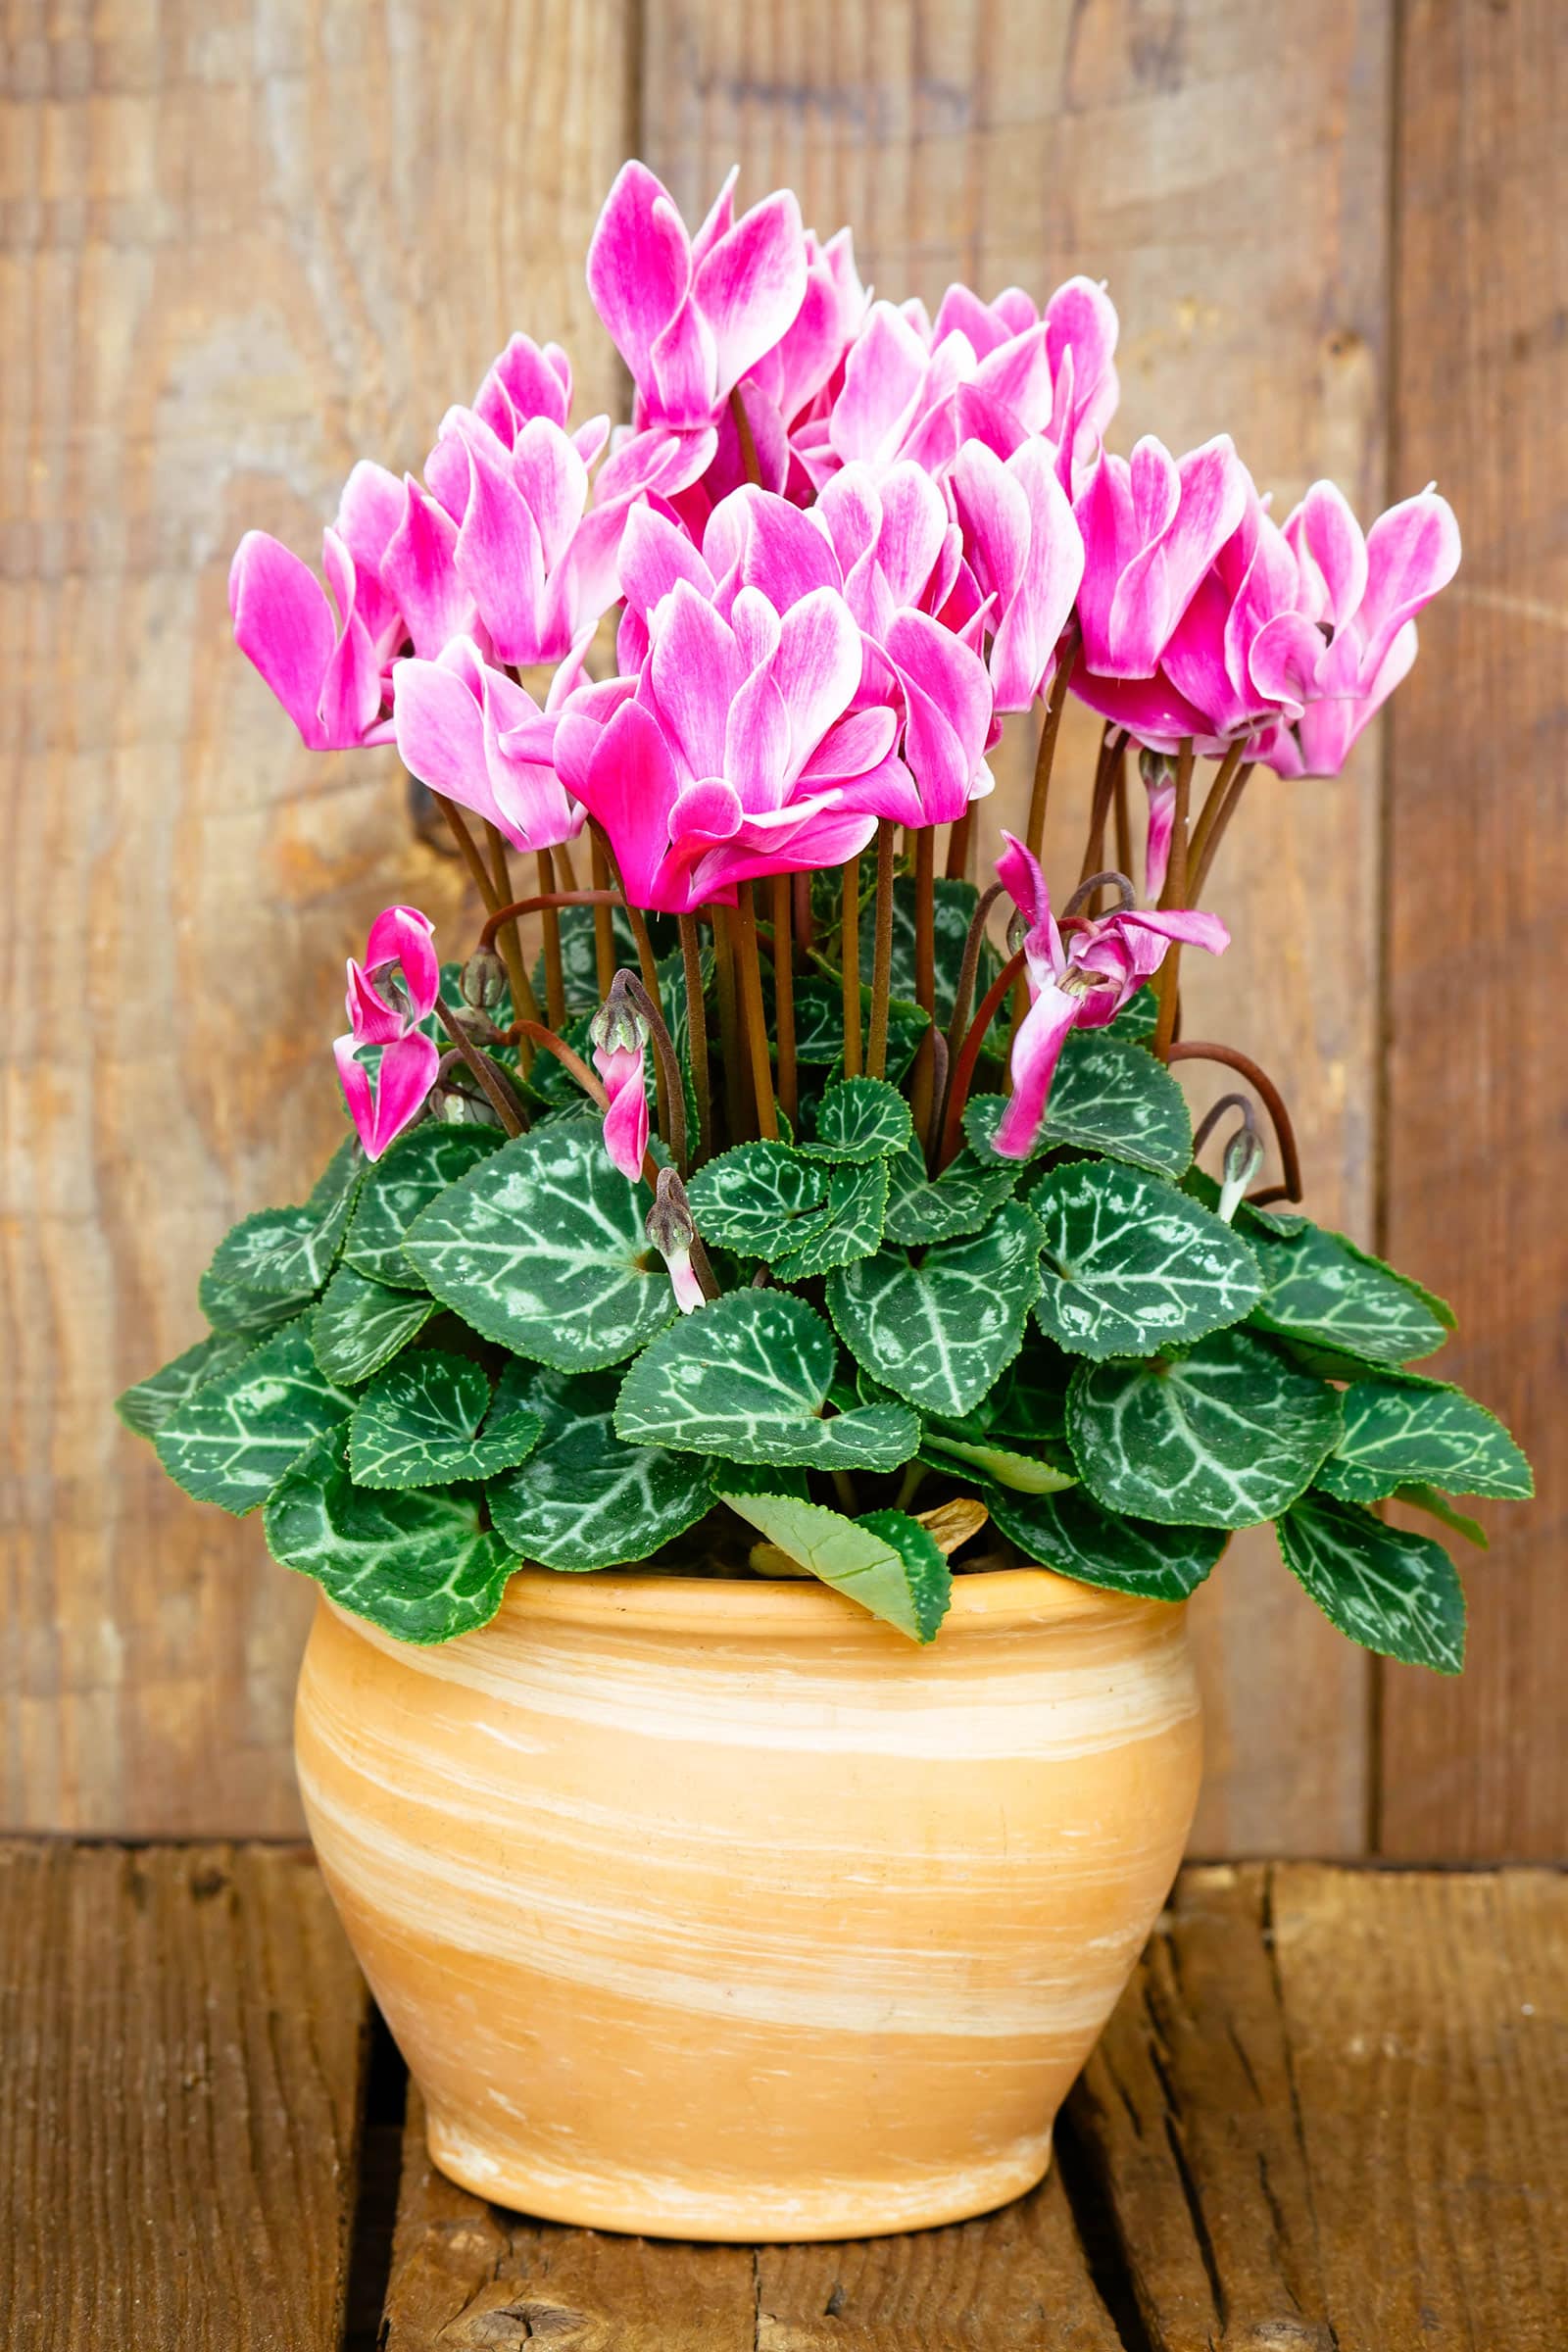 Bright pink Cyclamen flowers in a clay pot against a rustic wooden background